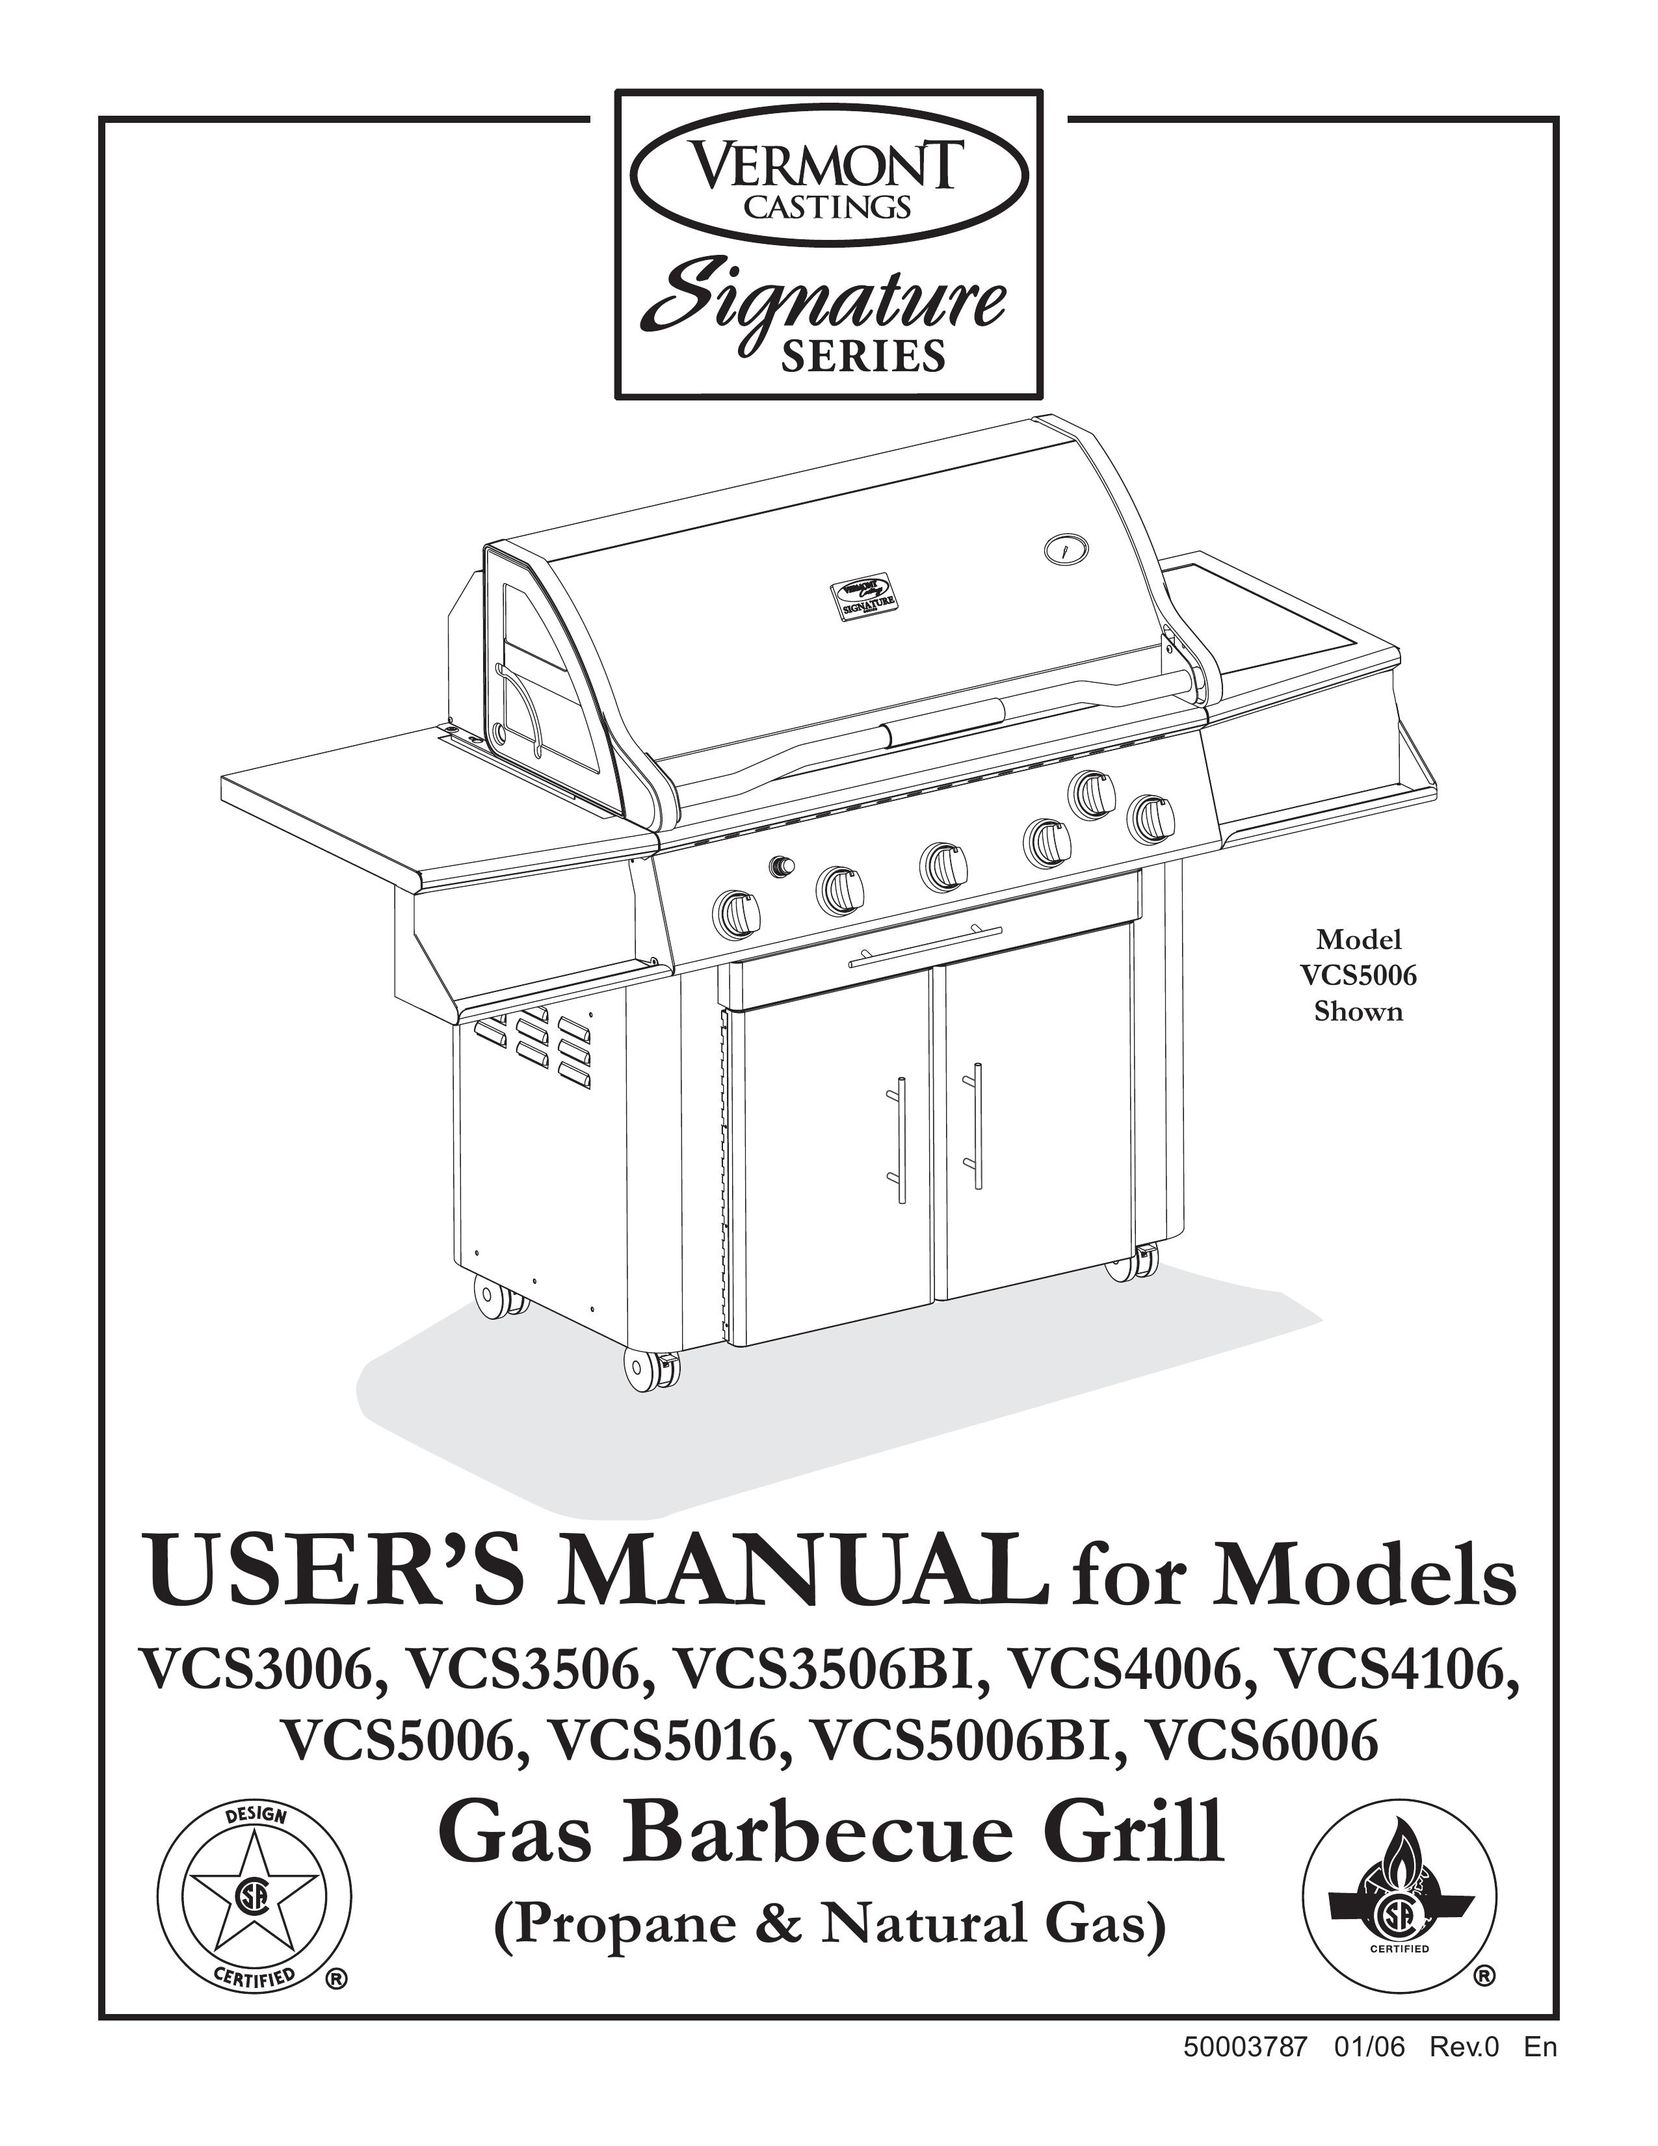 Vermont Casting VCS5006 Griddle User Manual